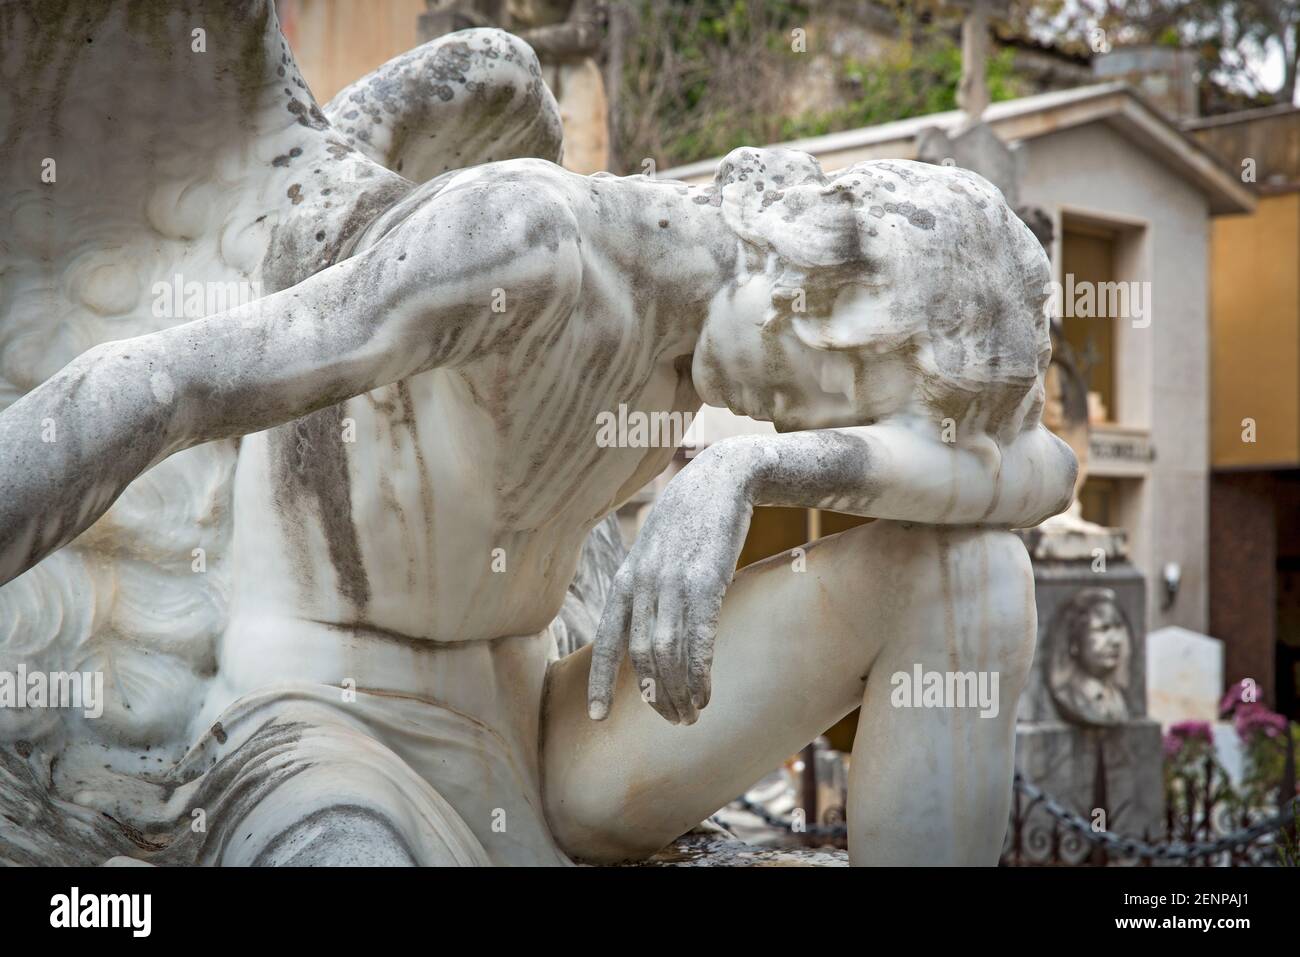 Statue of angel grieving at a gravesite Stock Photo